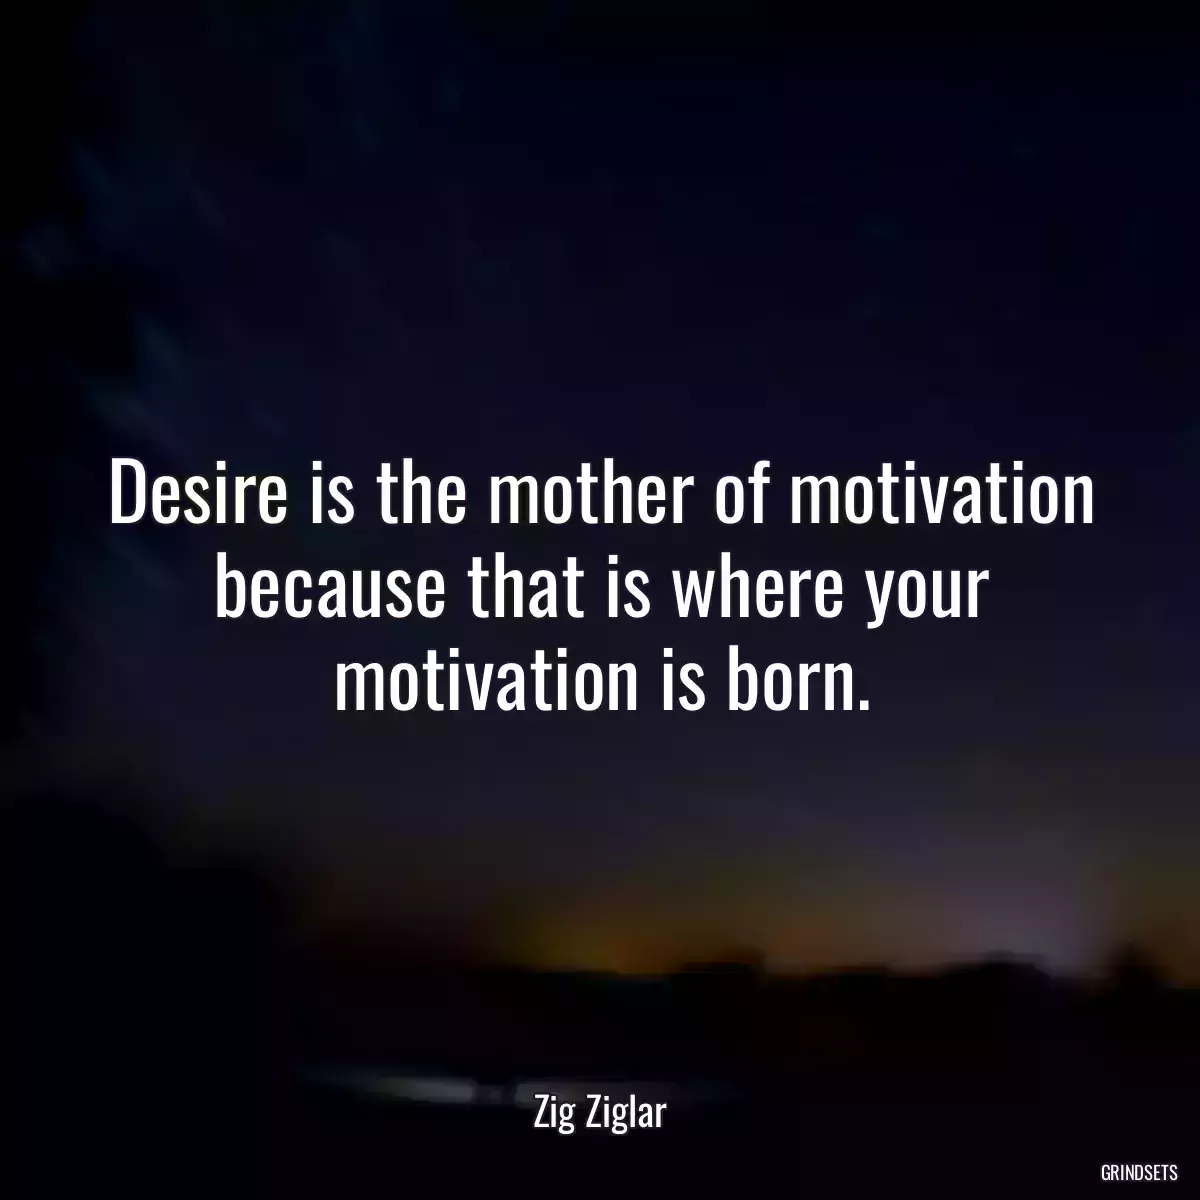 Desire is the mother of motivation because that is where your motivation is born.